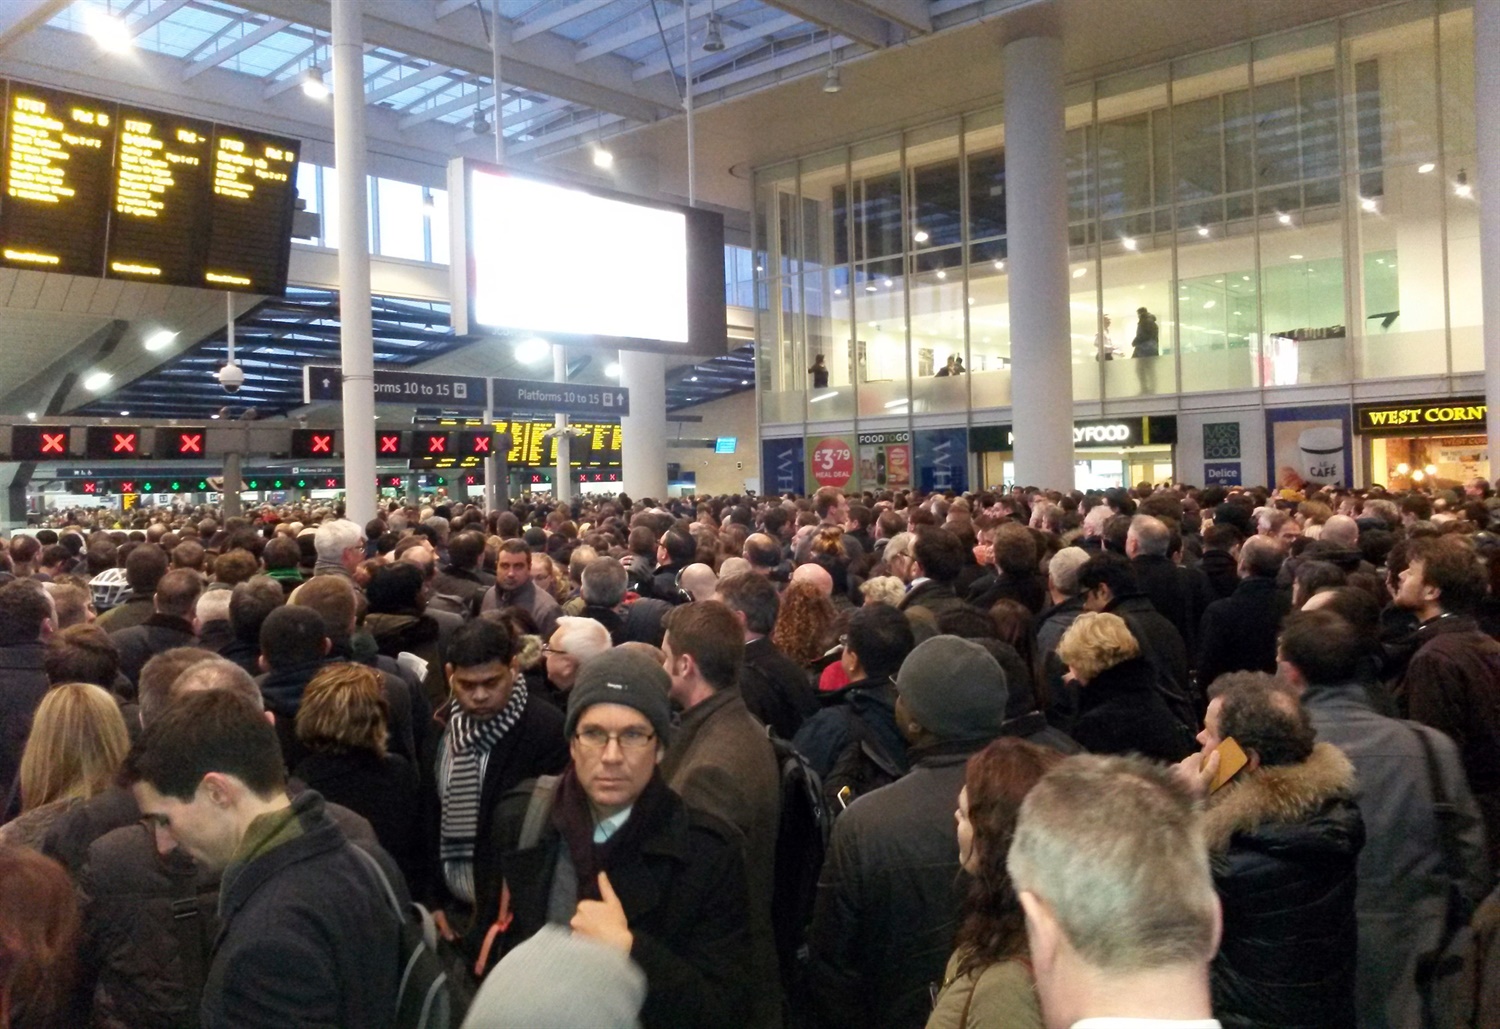 ‘Top 10’ overcrowded train services revealed